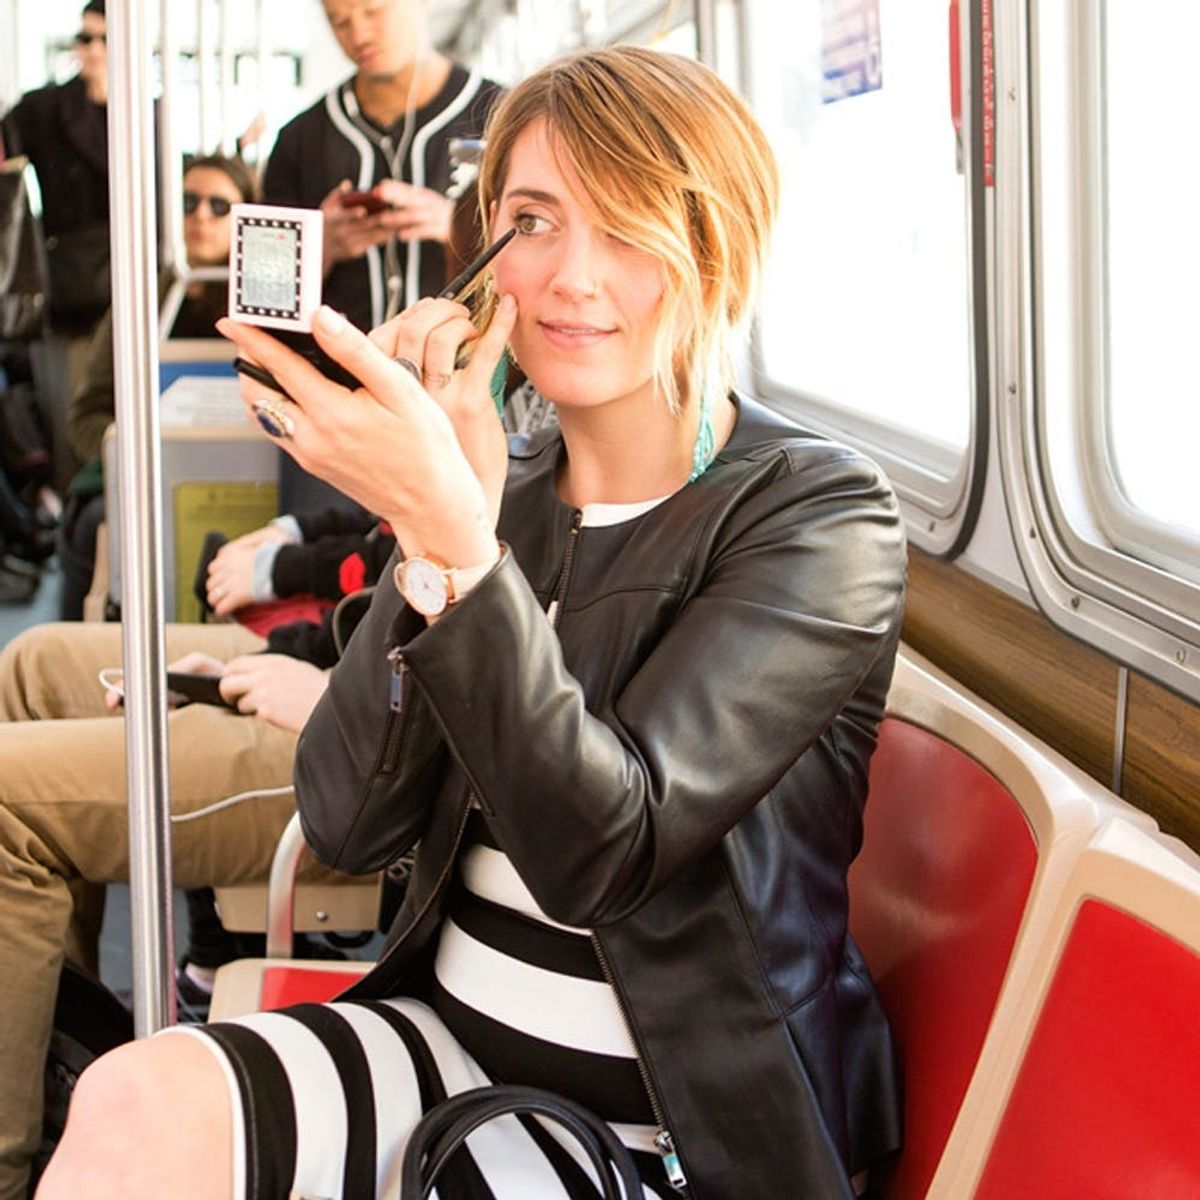 These Genius Commuter Makeup Hacks Will Save You Serious Time + Embarrassment